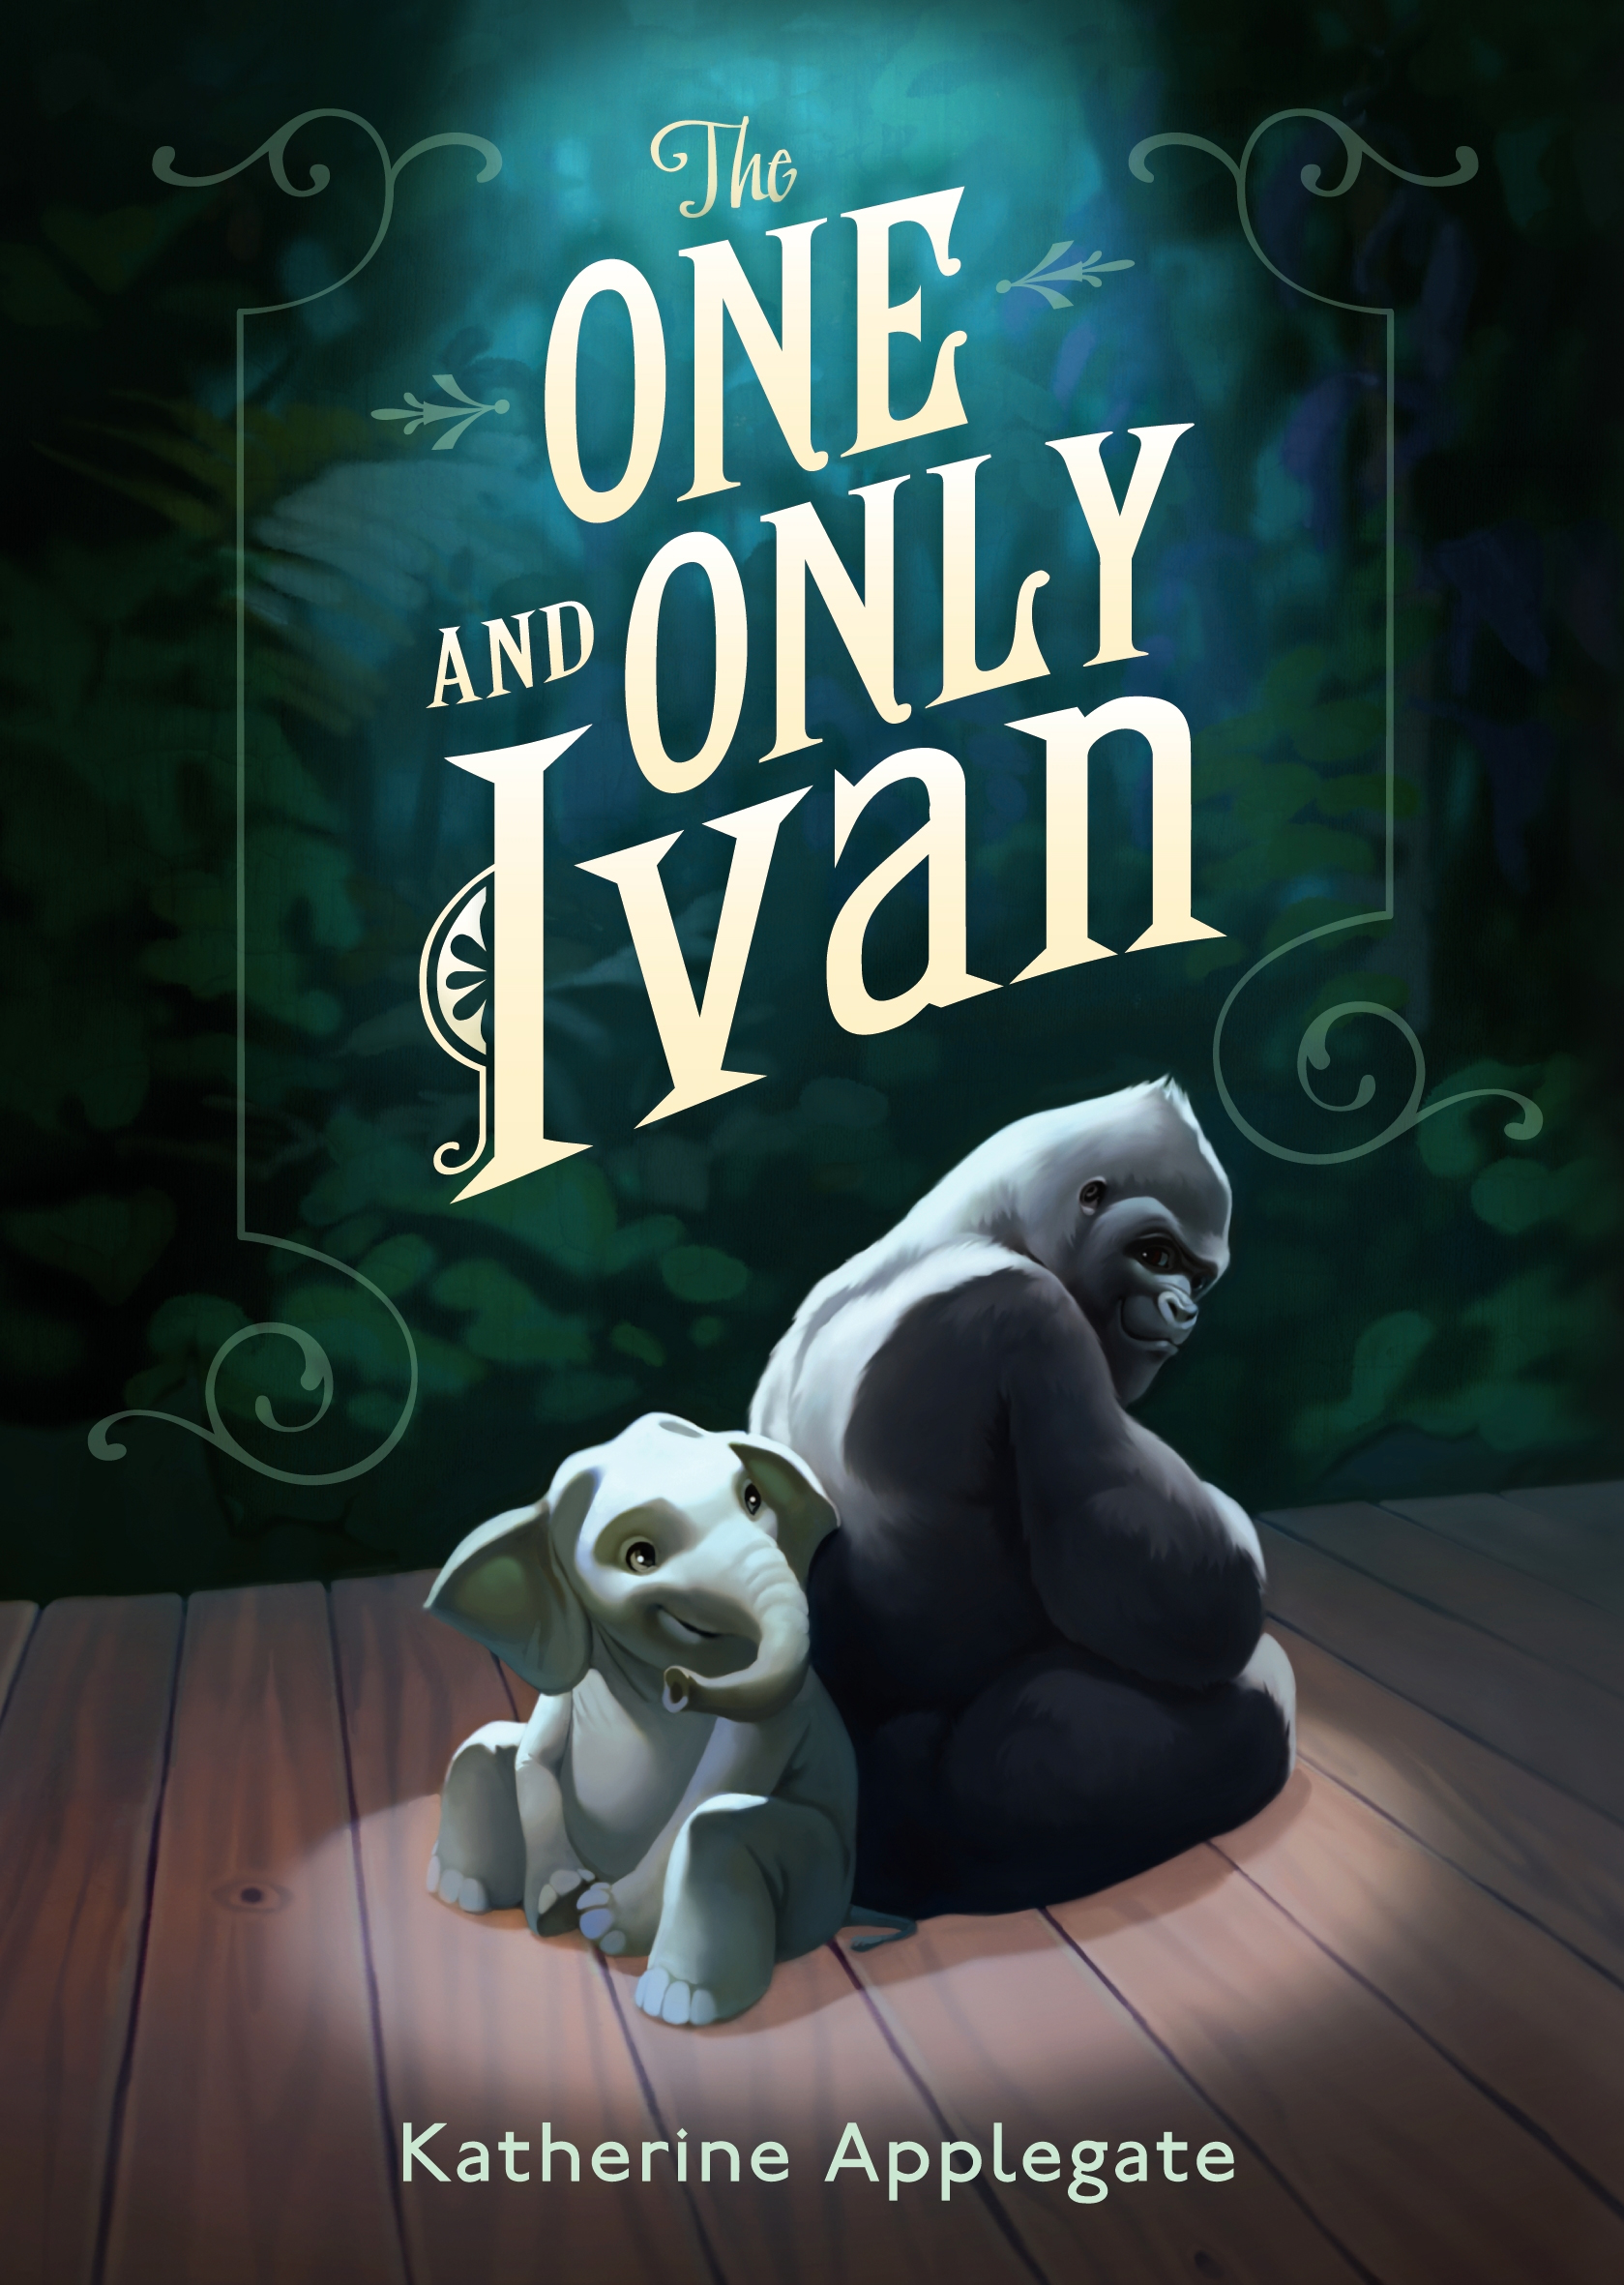 Disney to Acquire Newberry Award Winner THE ONE AND ONLY IVAN — GeekTyrant